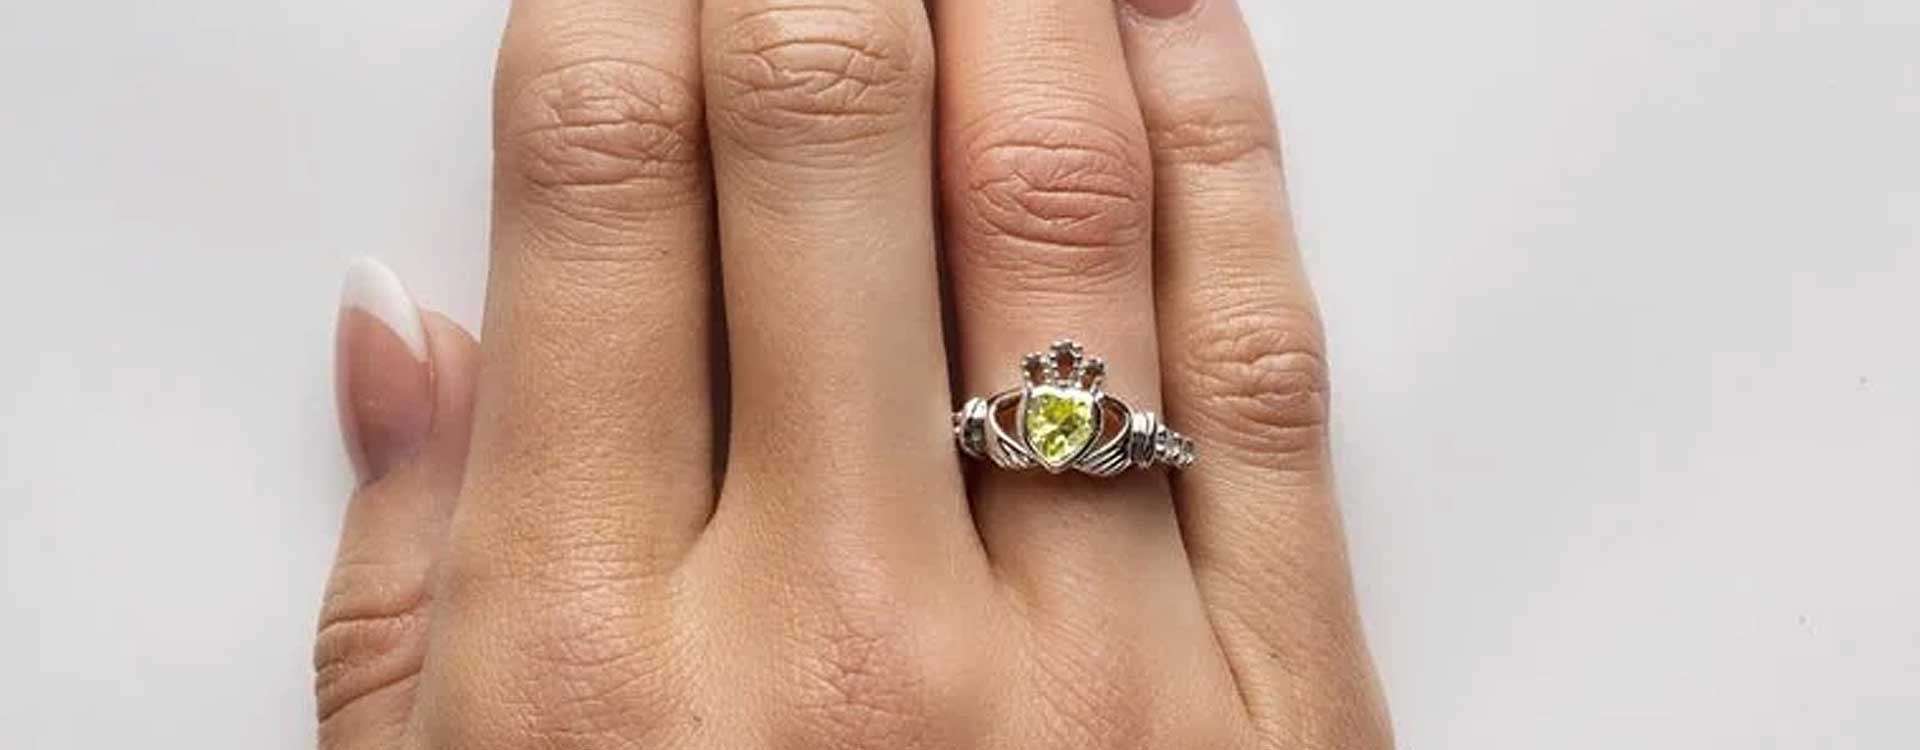 Single? Taken? What your Claddagh ring secretly says about you | by The  Irish Store | Medium